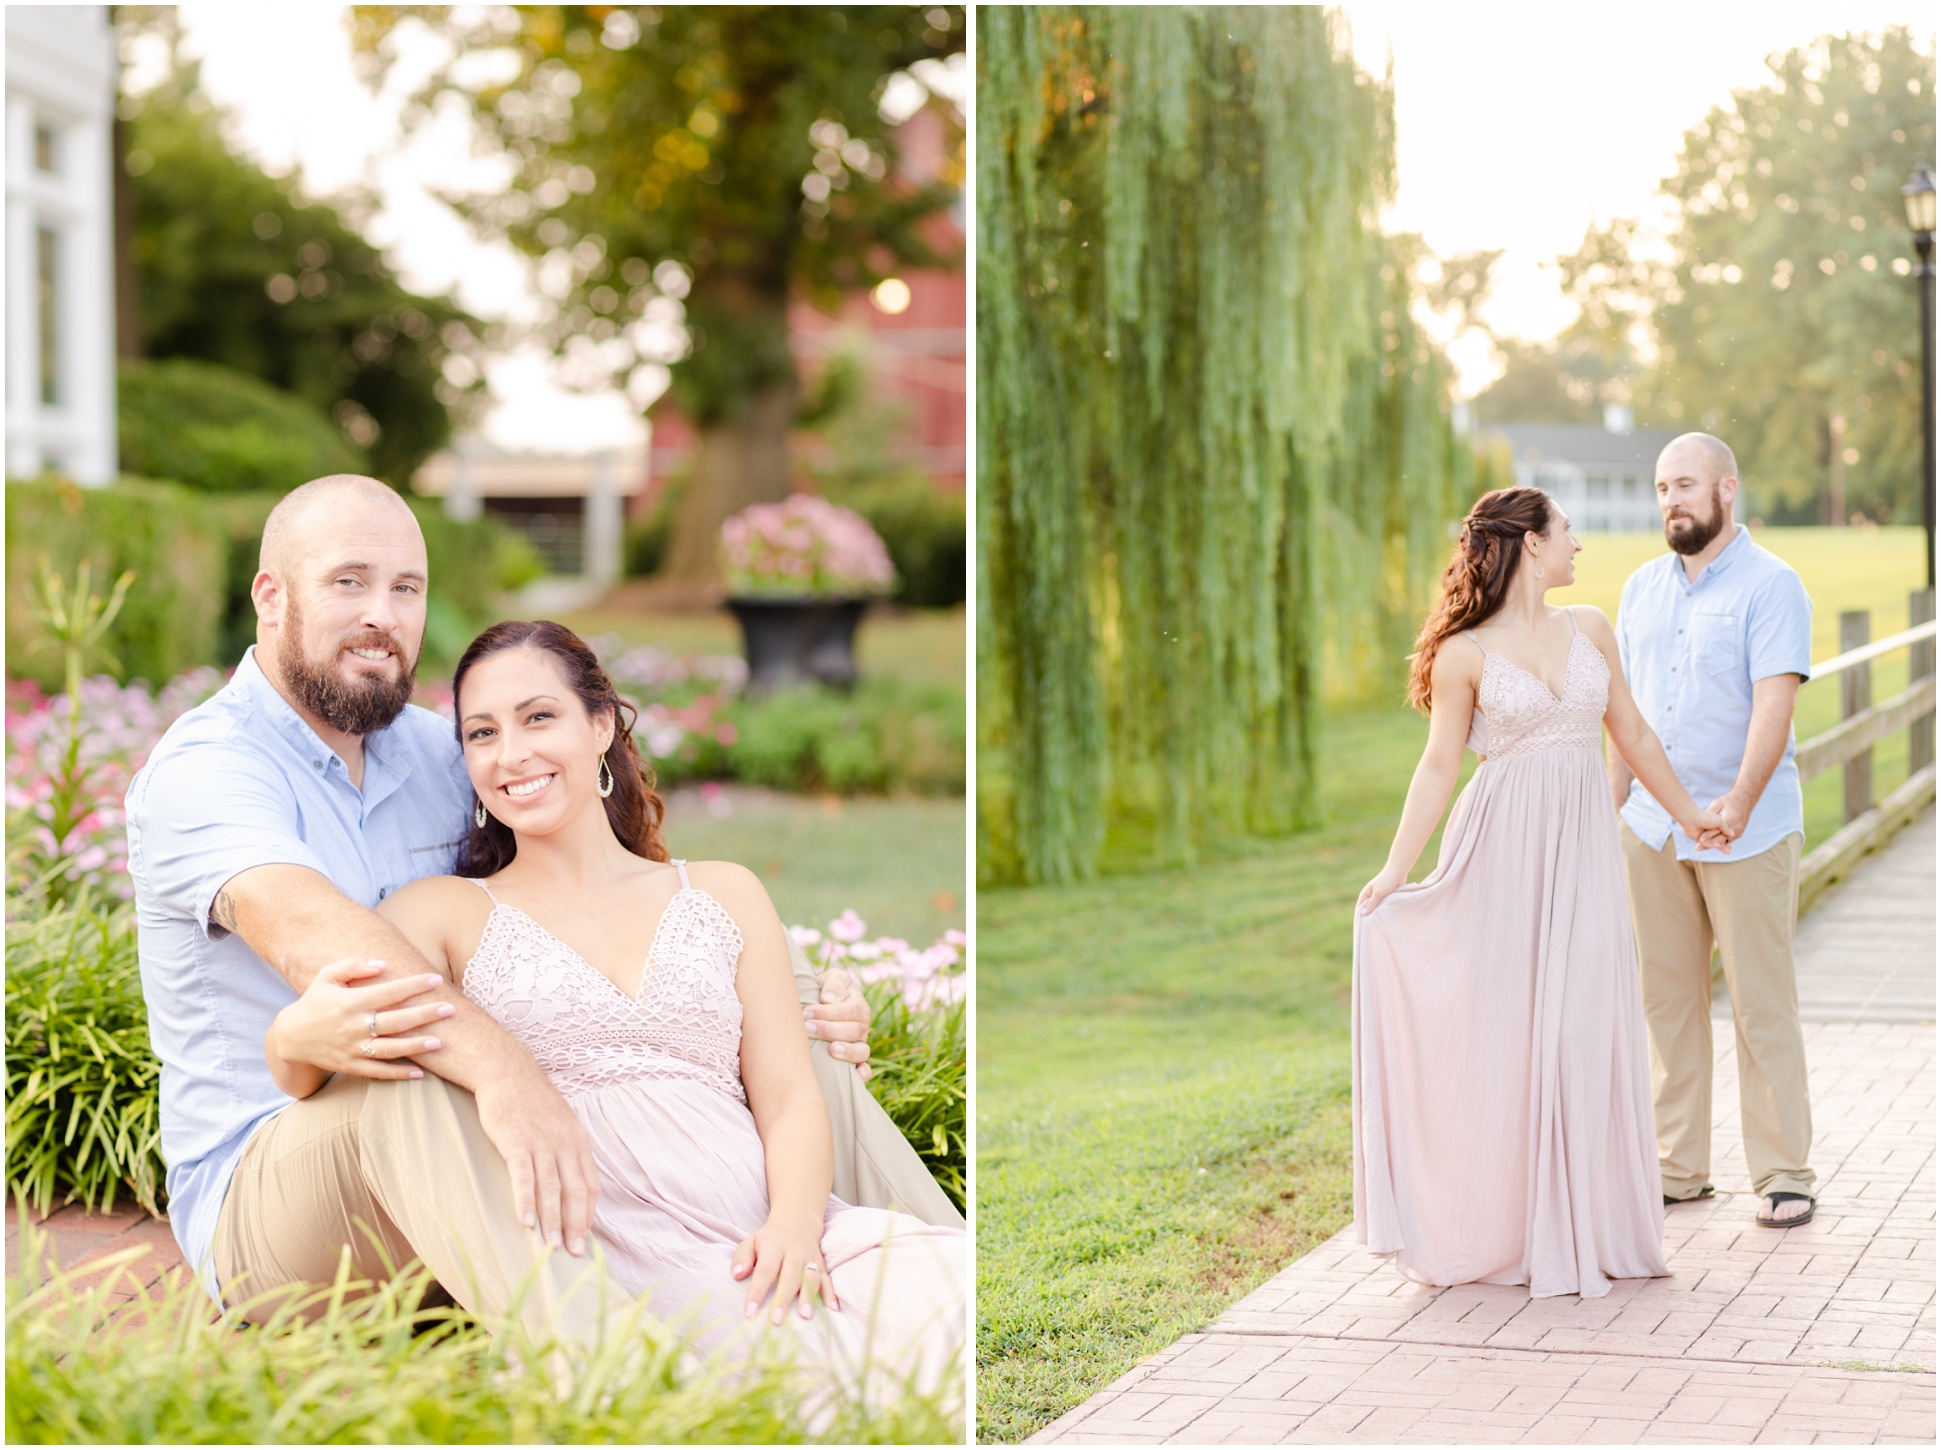 Two images of Brooke and Patrick in the garden and walking past the willow tree at Swan Harbor Farm